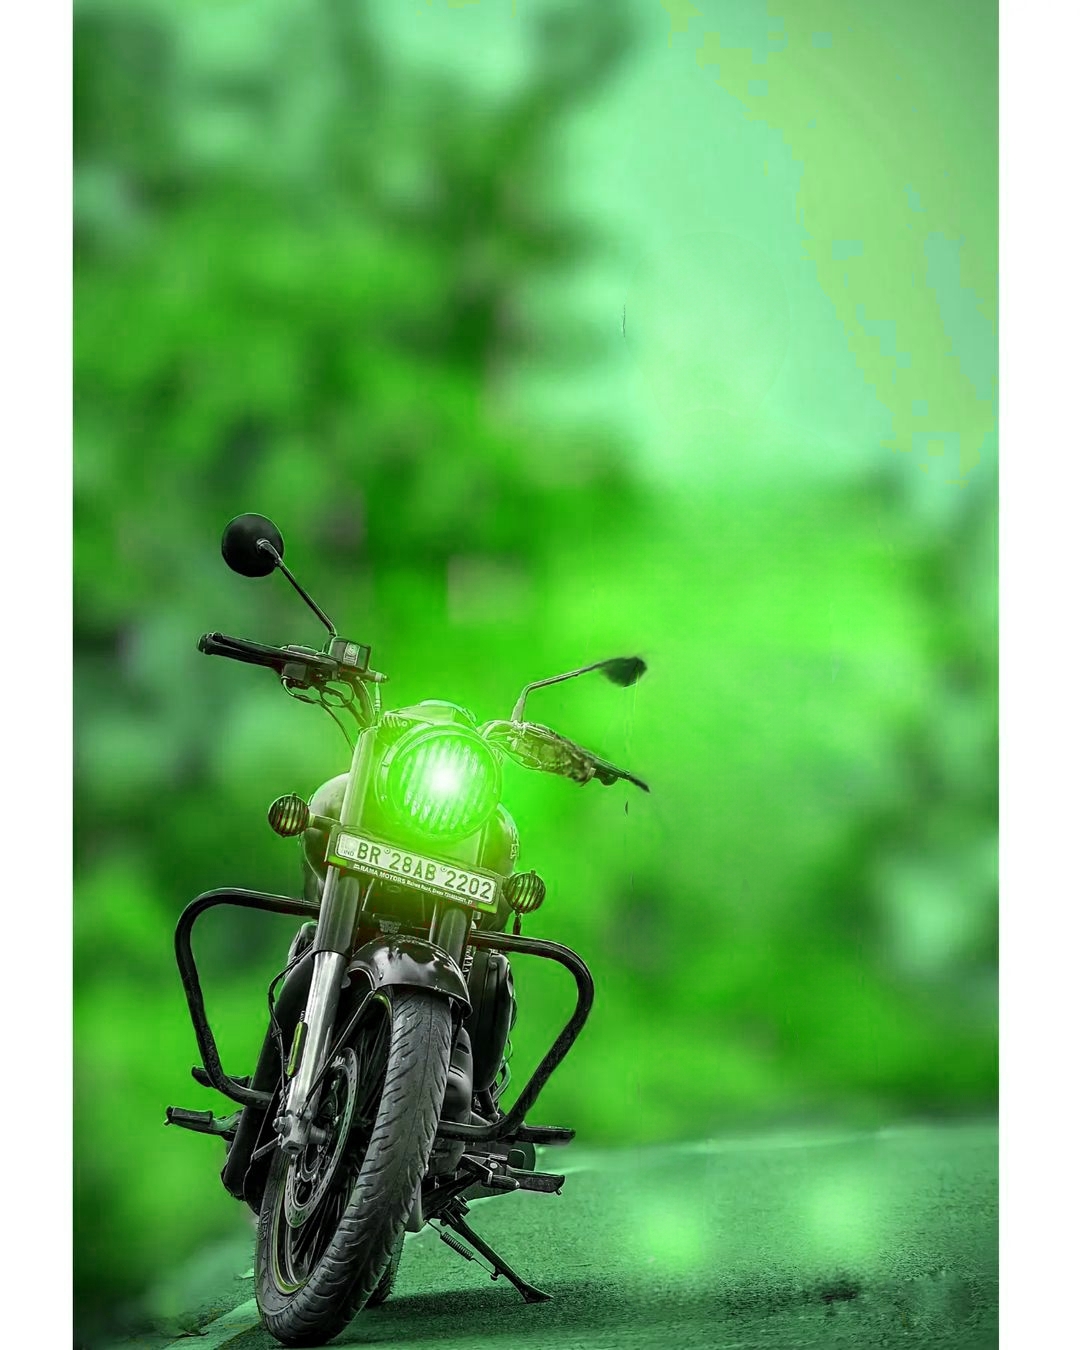 green colour CB editing background with royal enfield bike